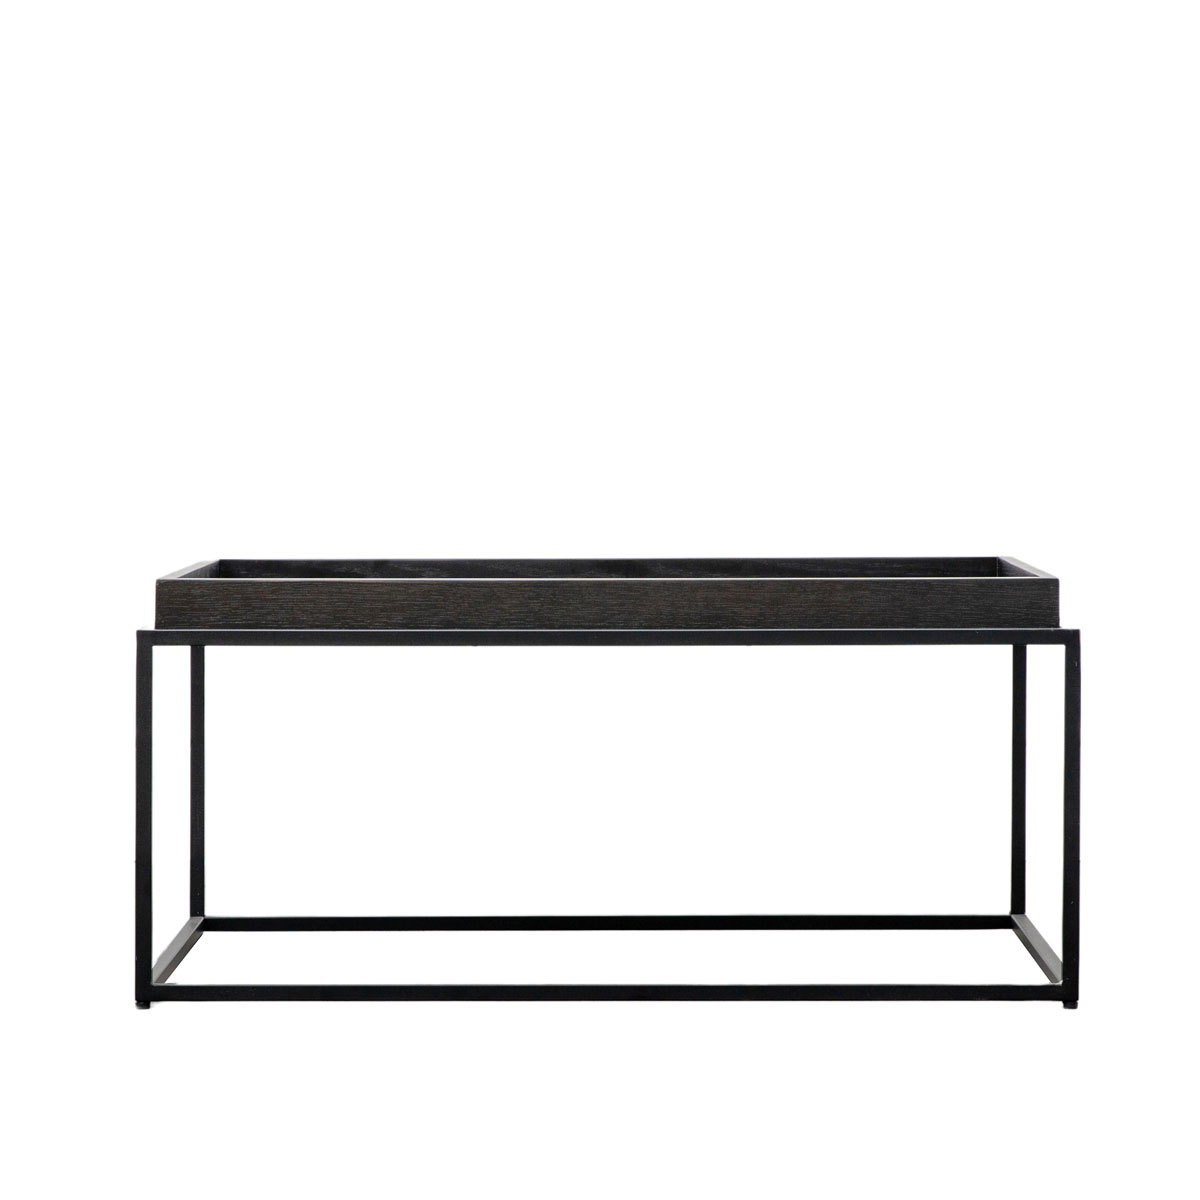 Forden Tray Coffee Table Black 900x600x400mm